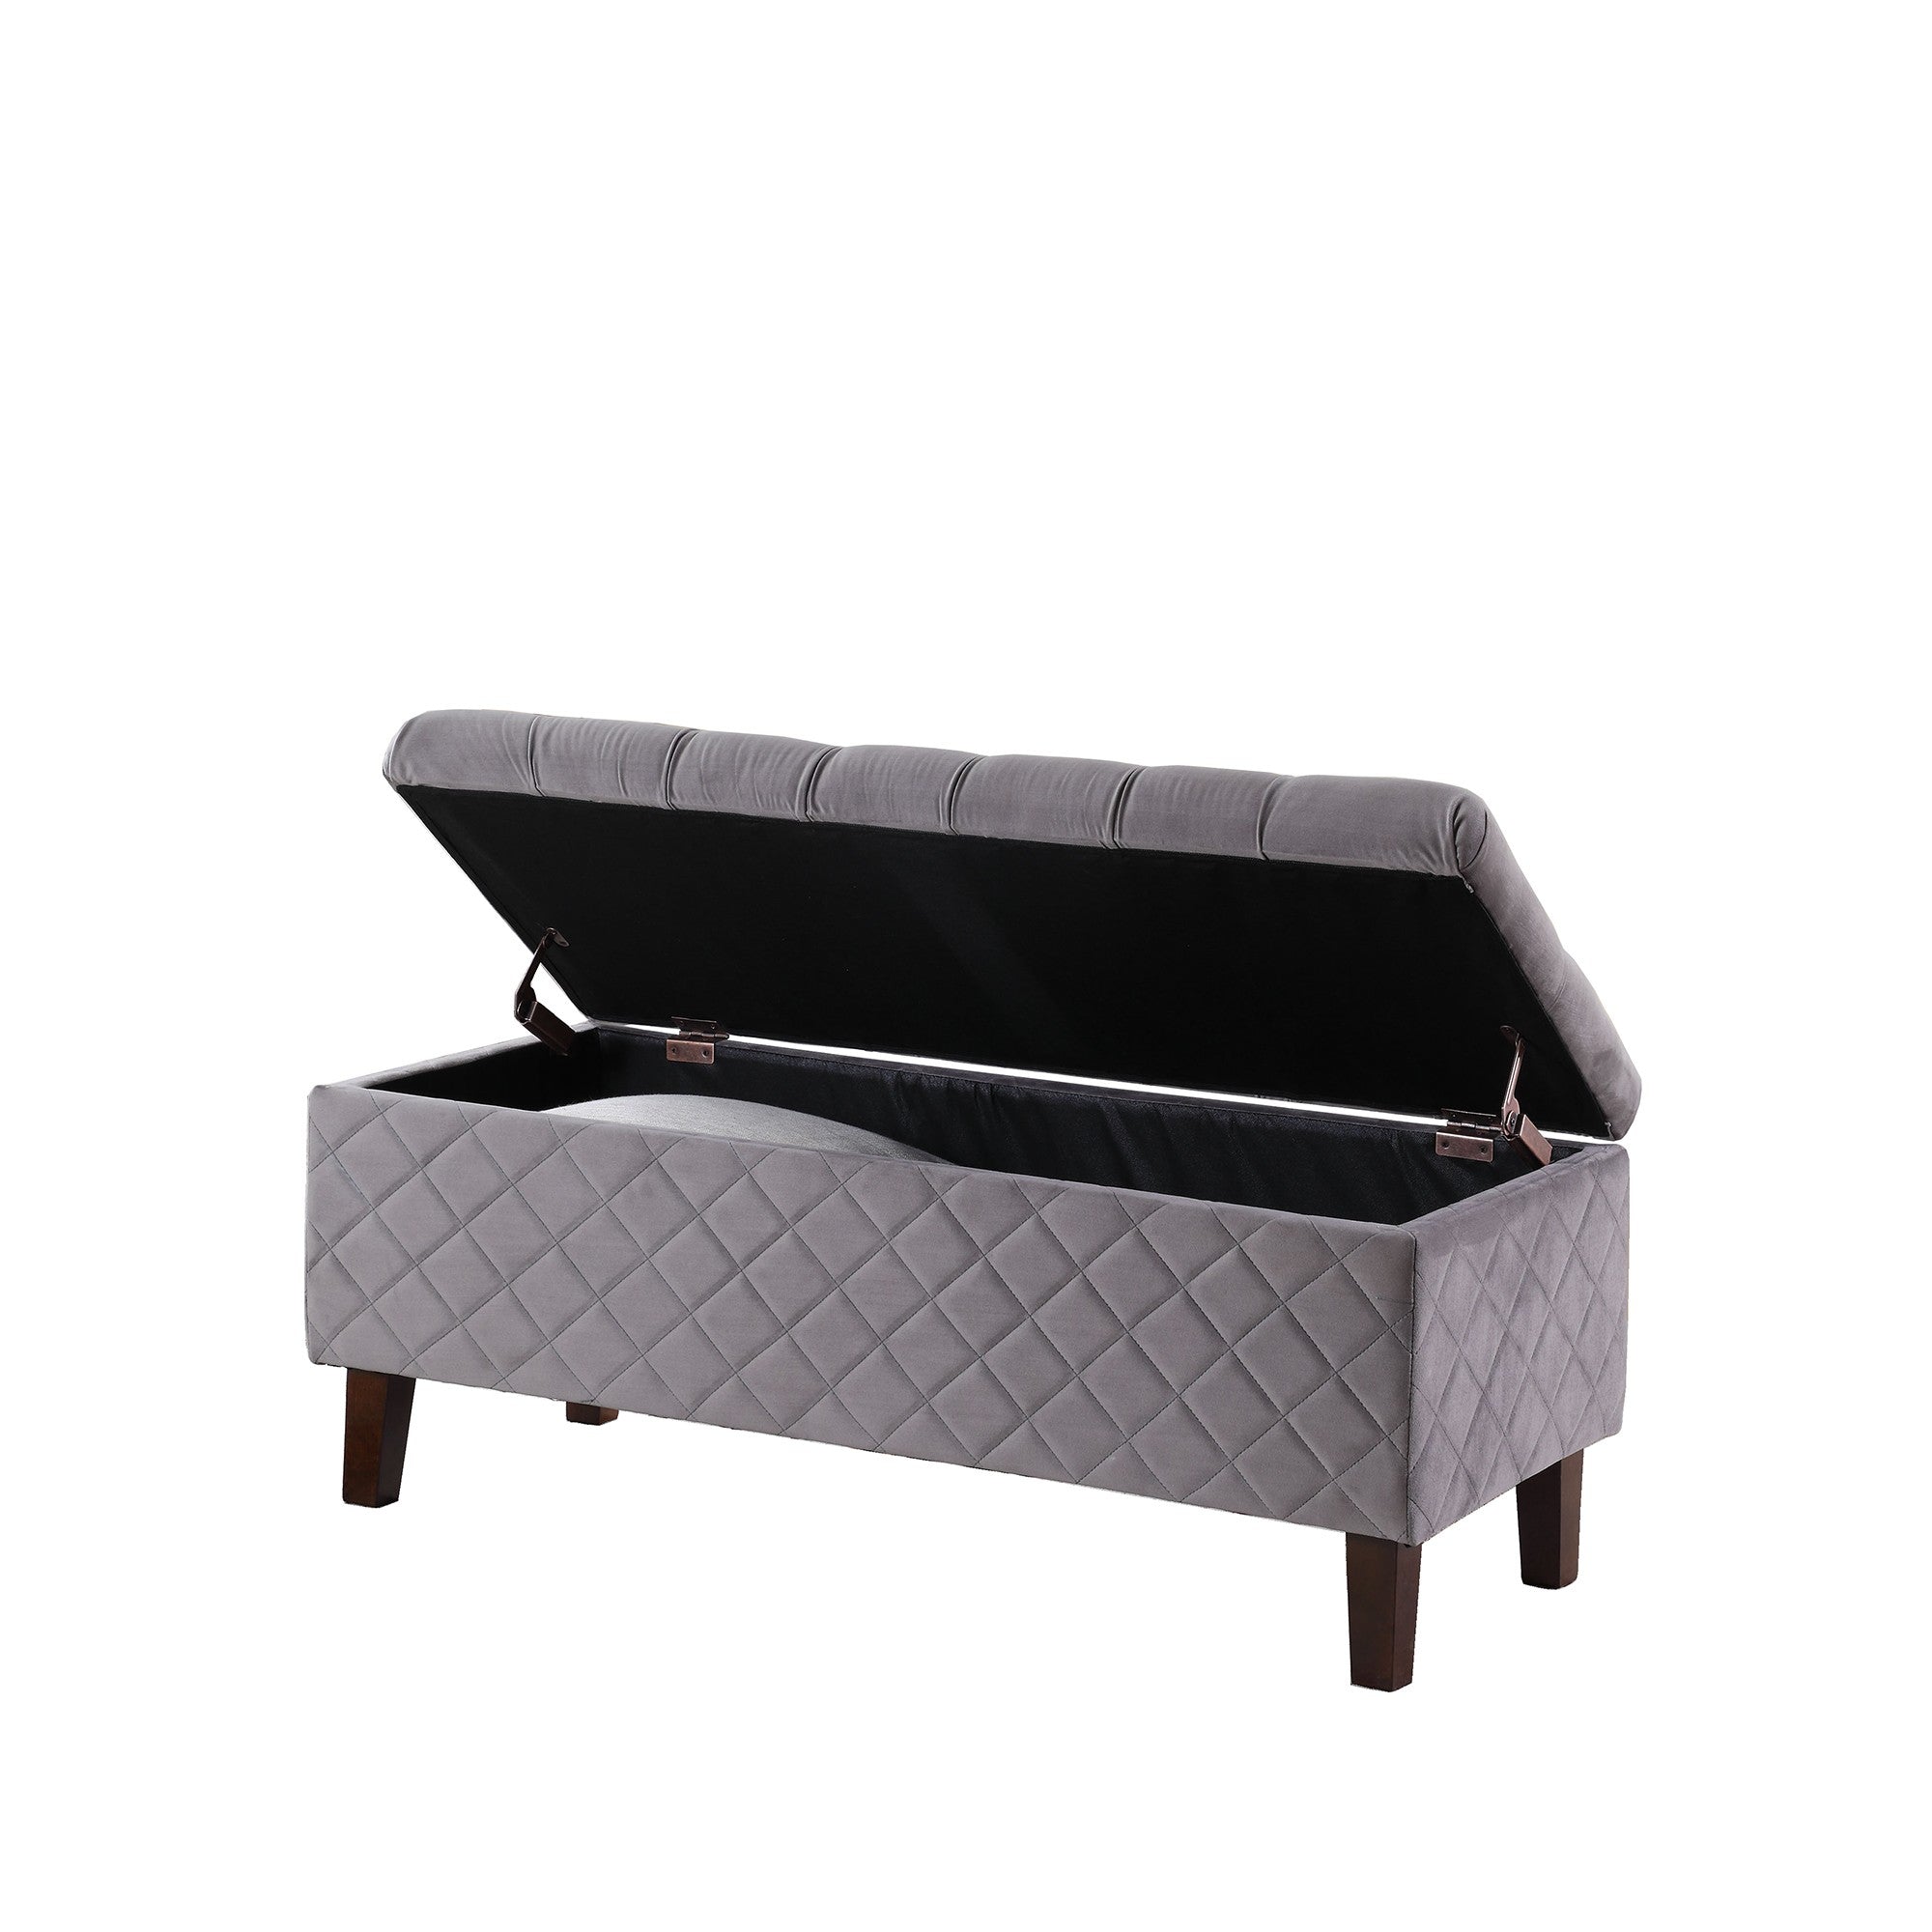 41" Gray and Dark Brown Upholstered Polyester Blend Bench with Flip top